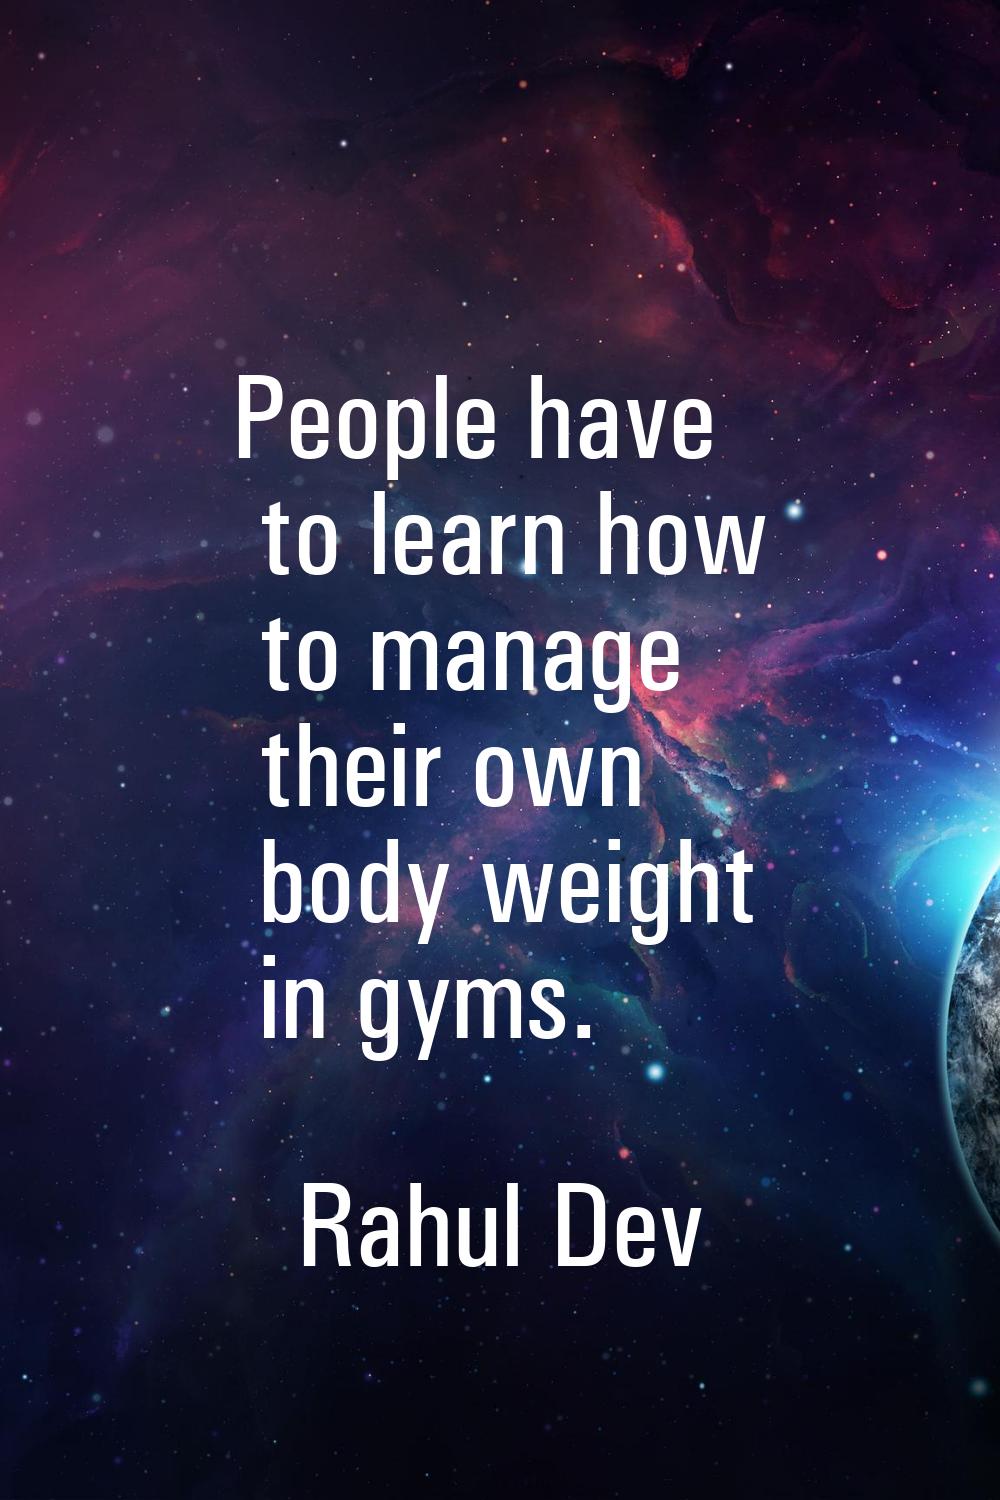 People have to learn how to manage their own body weight in gyms.